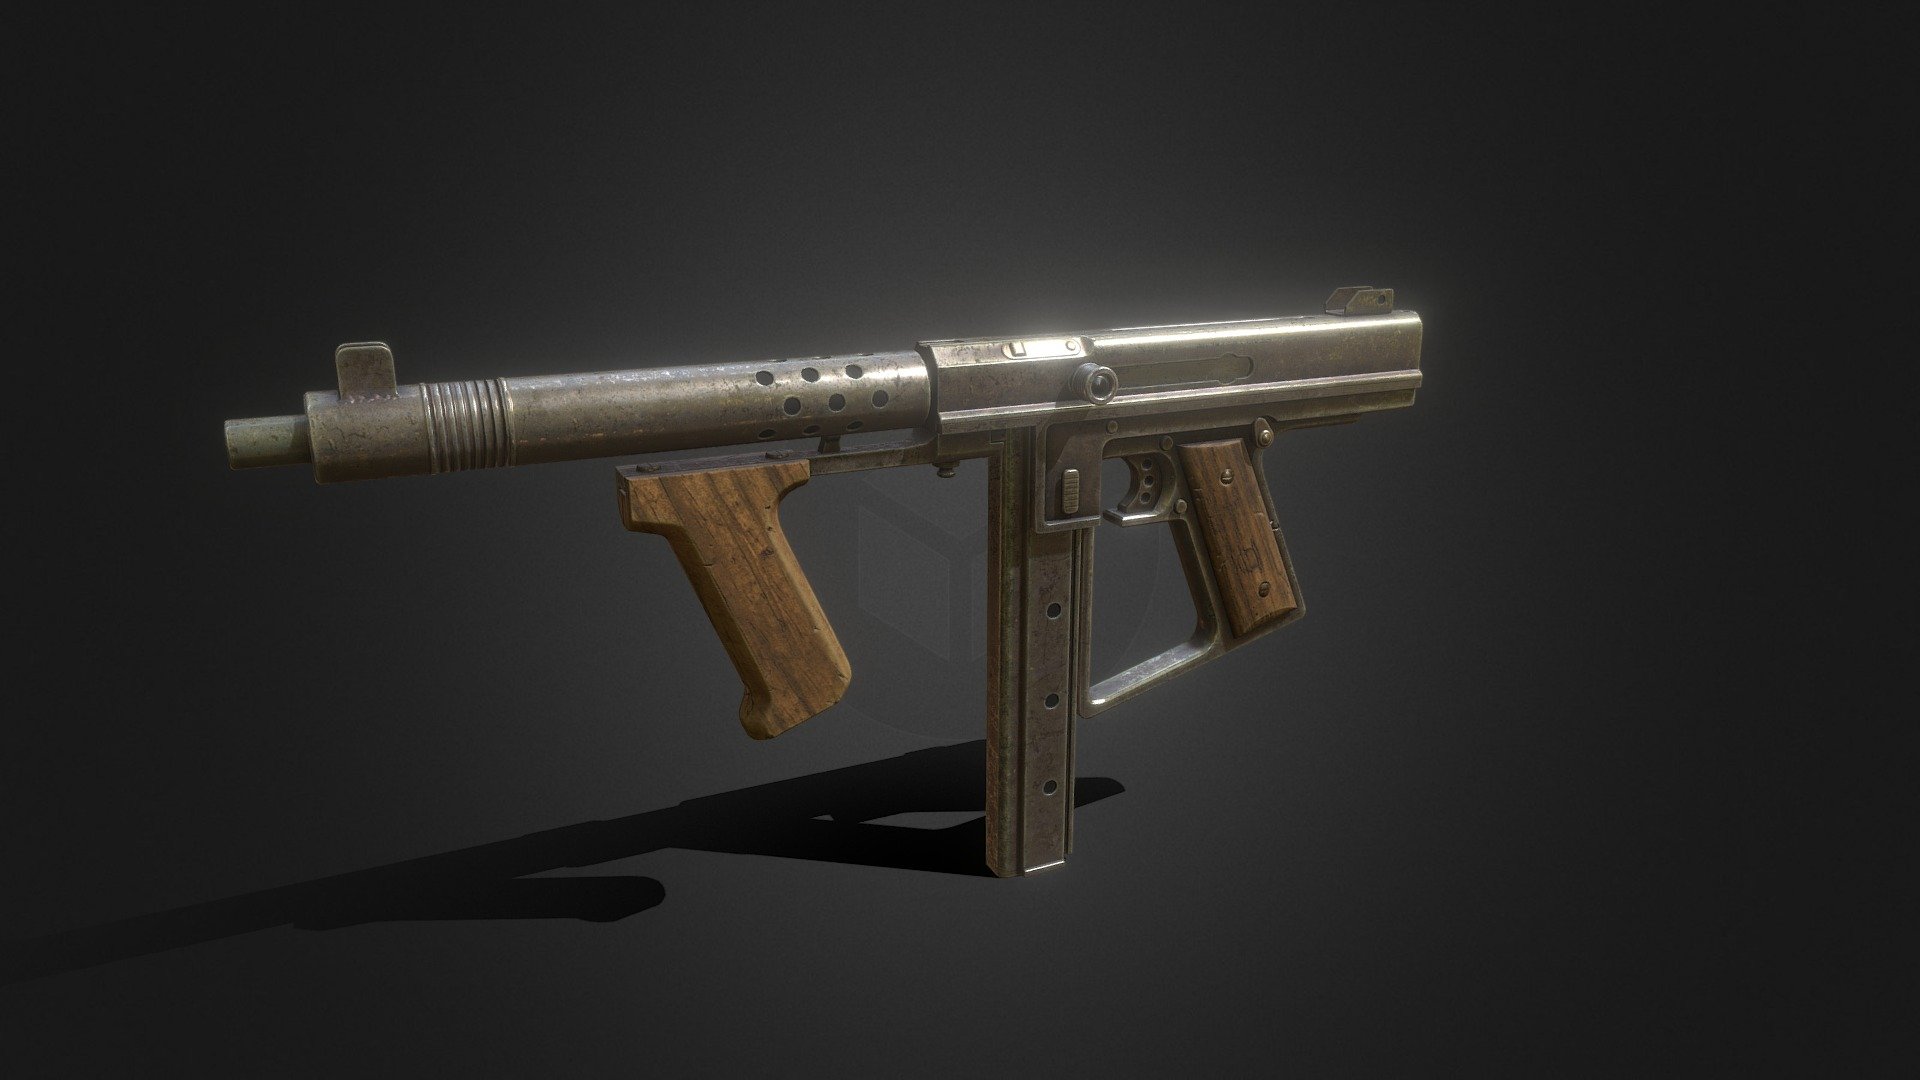 rework of previous model

smg for my shooter project

blender &gt; low poly 

3dcoat &gt; uvs, highpoly and textures - Persuader v2 - 3D model by DJMaesen (@bumstrum) 3d model